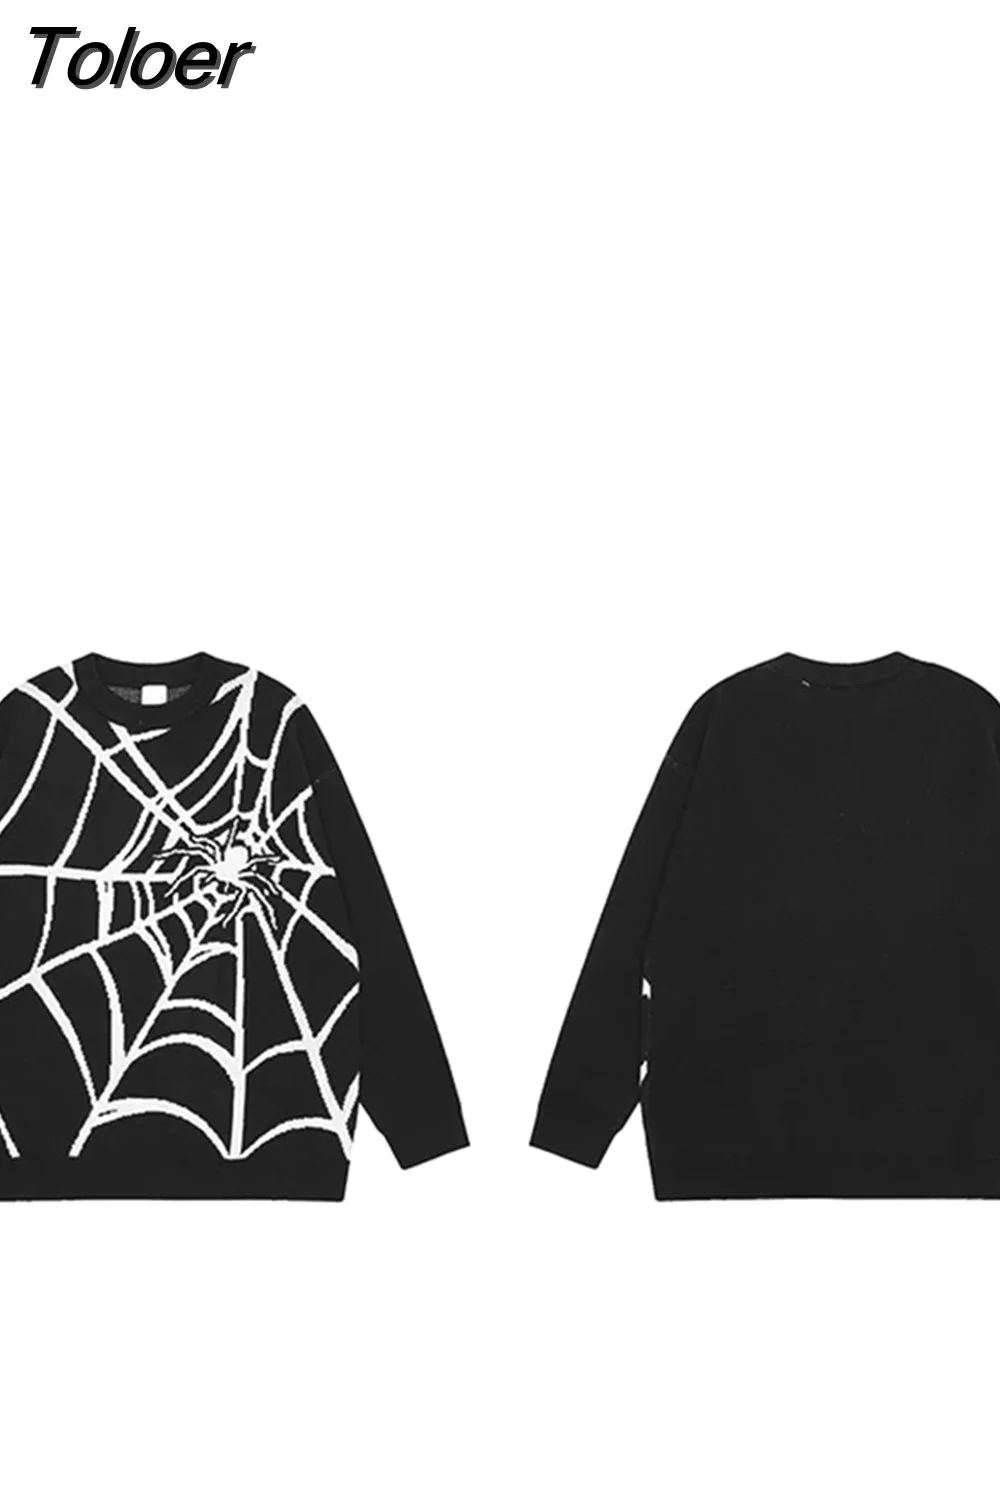 Toloer NEW Streetwear Spider Web Sweater Knitted Sweater Hip Hop Pullover Cotton Unisex Harajuku Sweater Soft Y2K Clothing Black